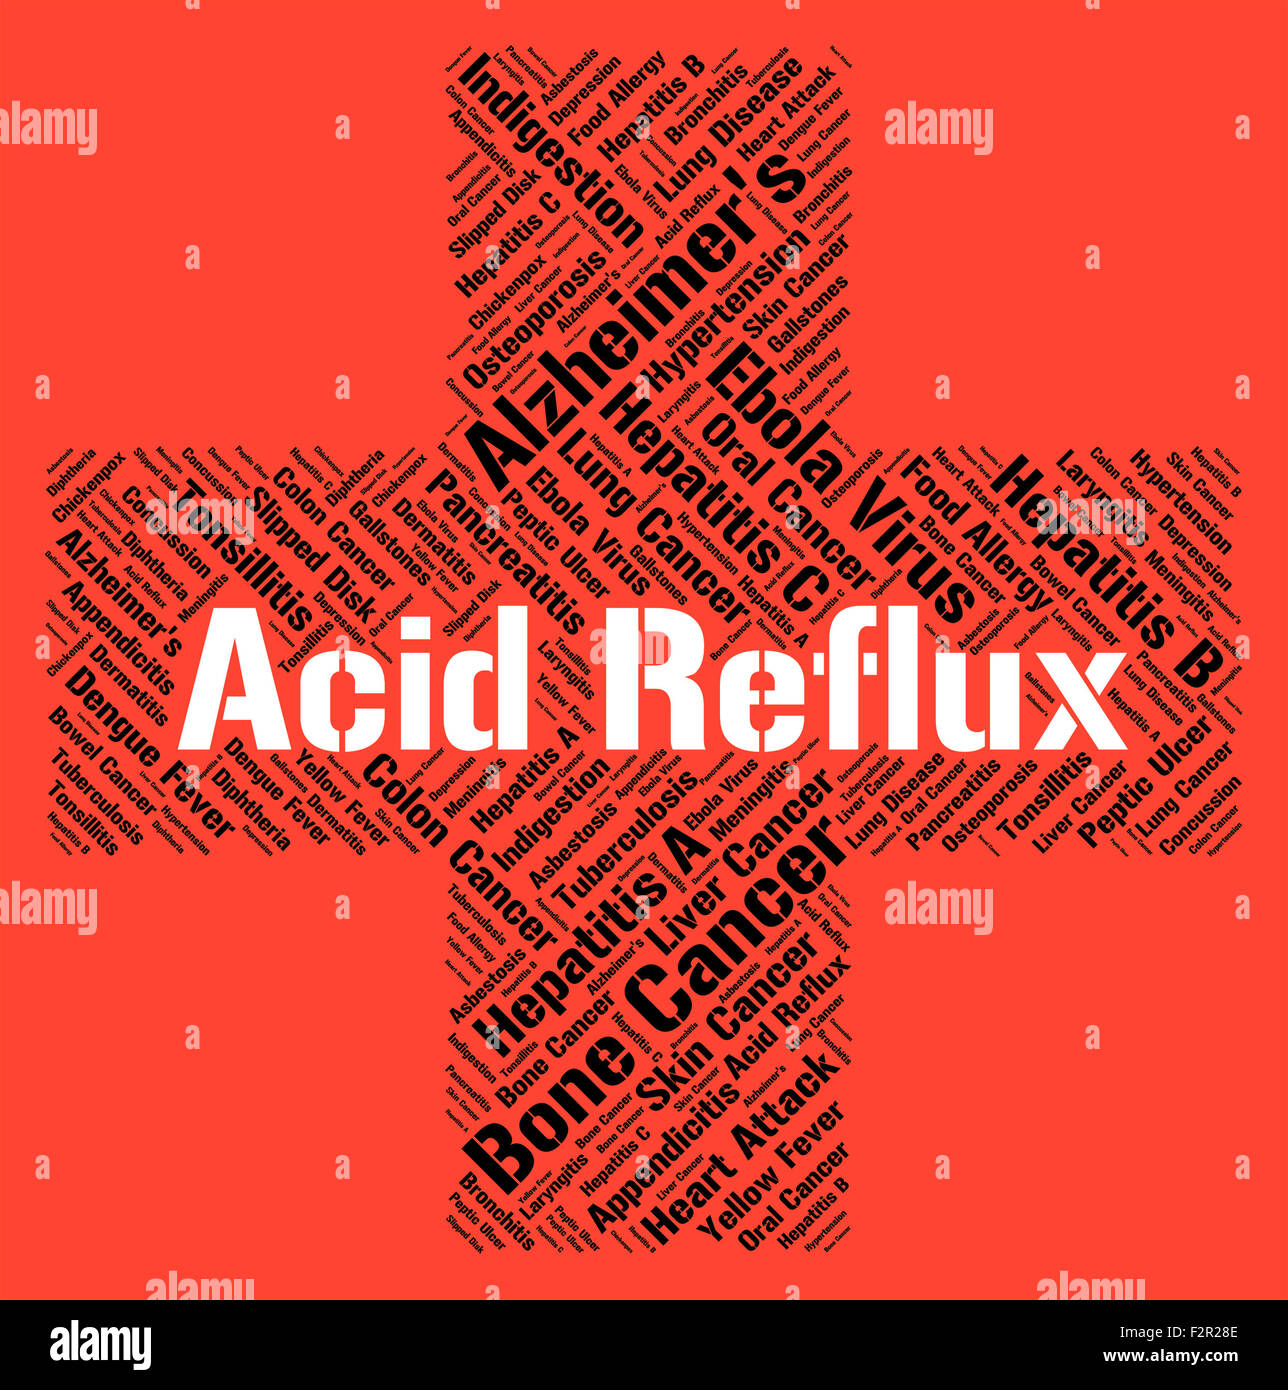 Acid Reflux Indicating Poor Health And Disease Stock Photo